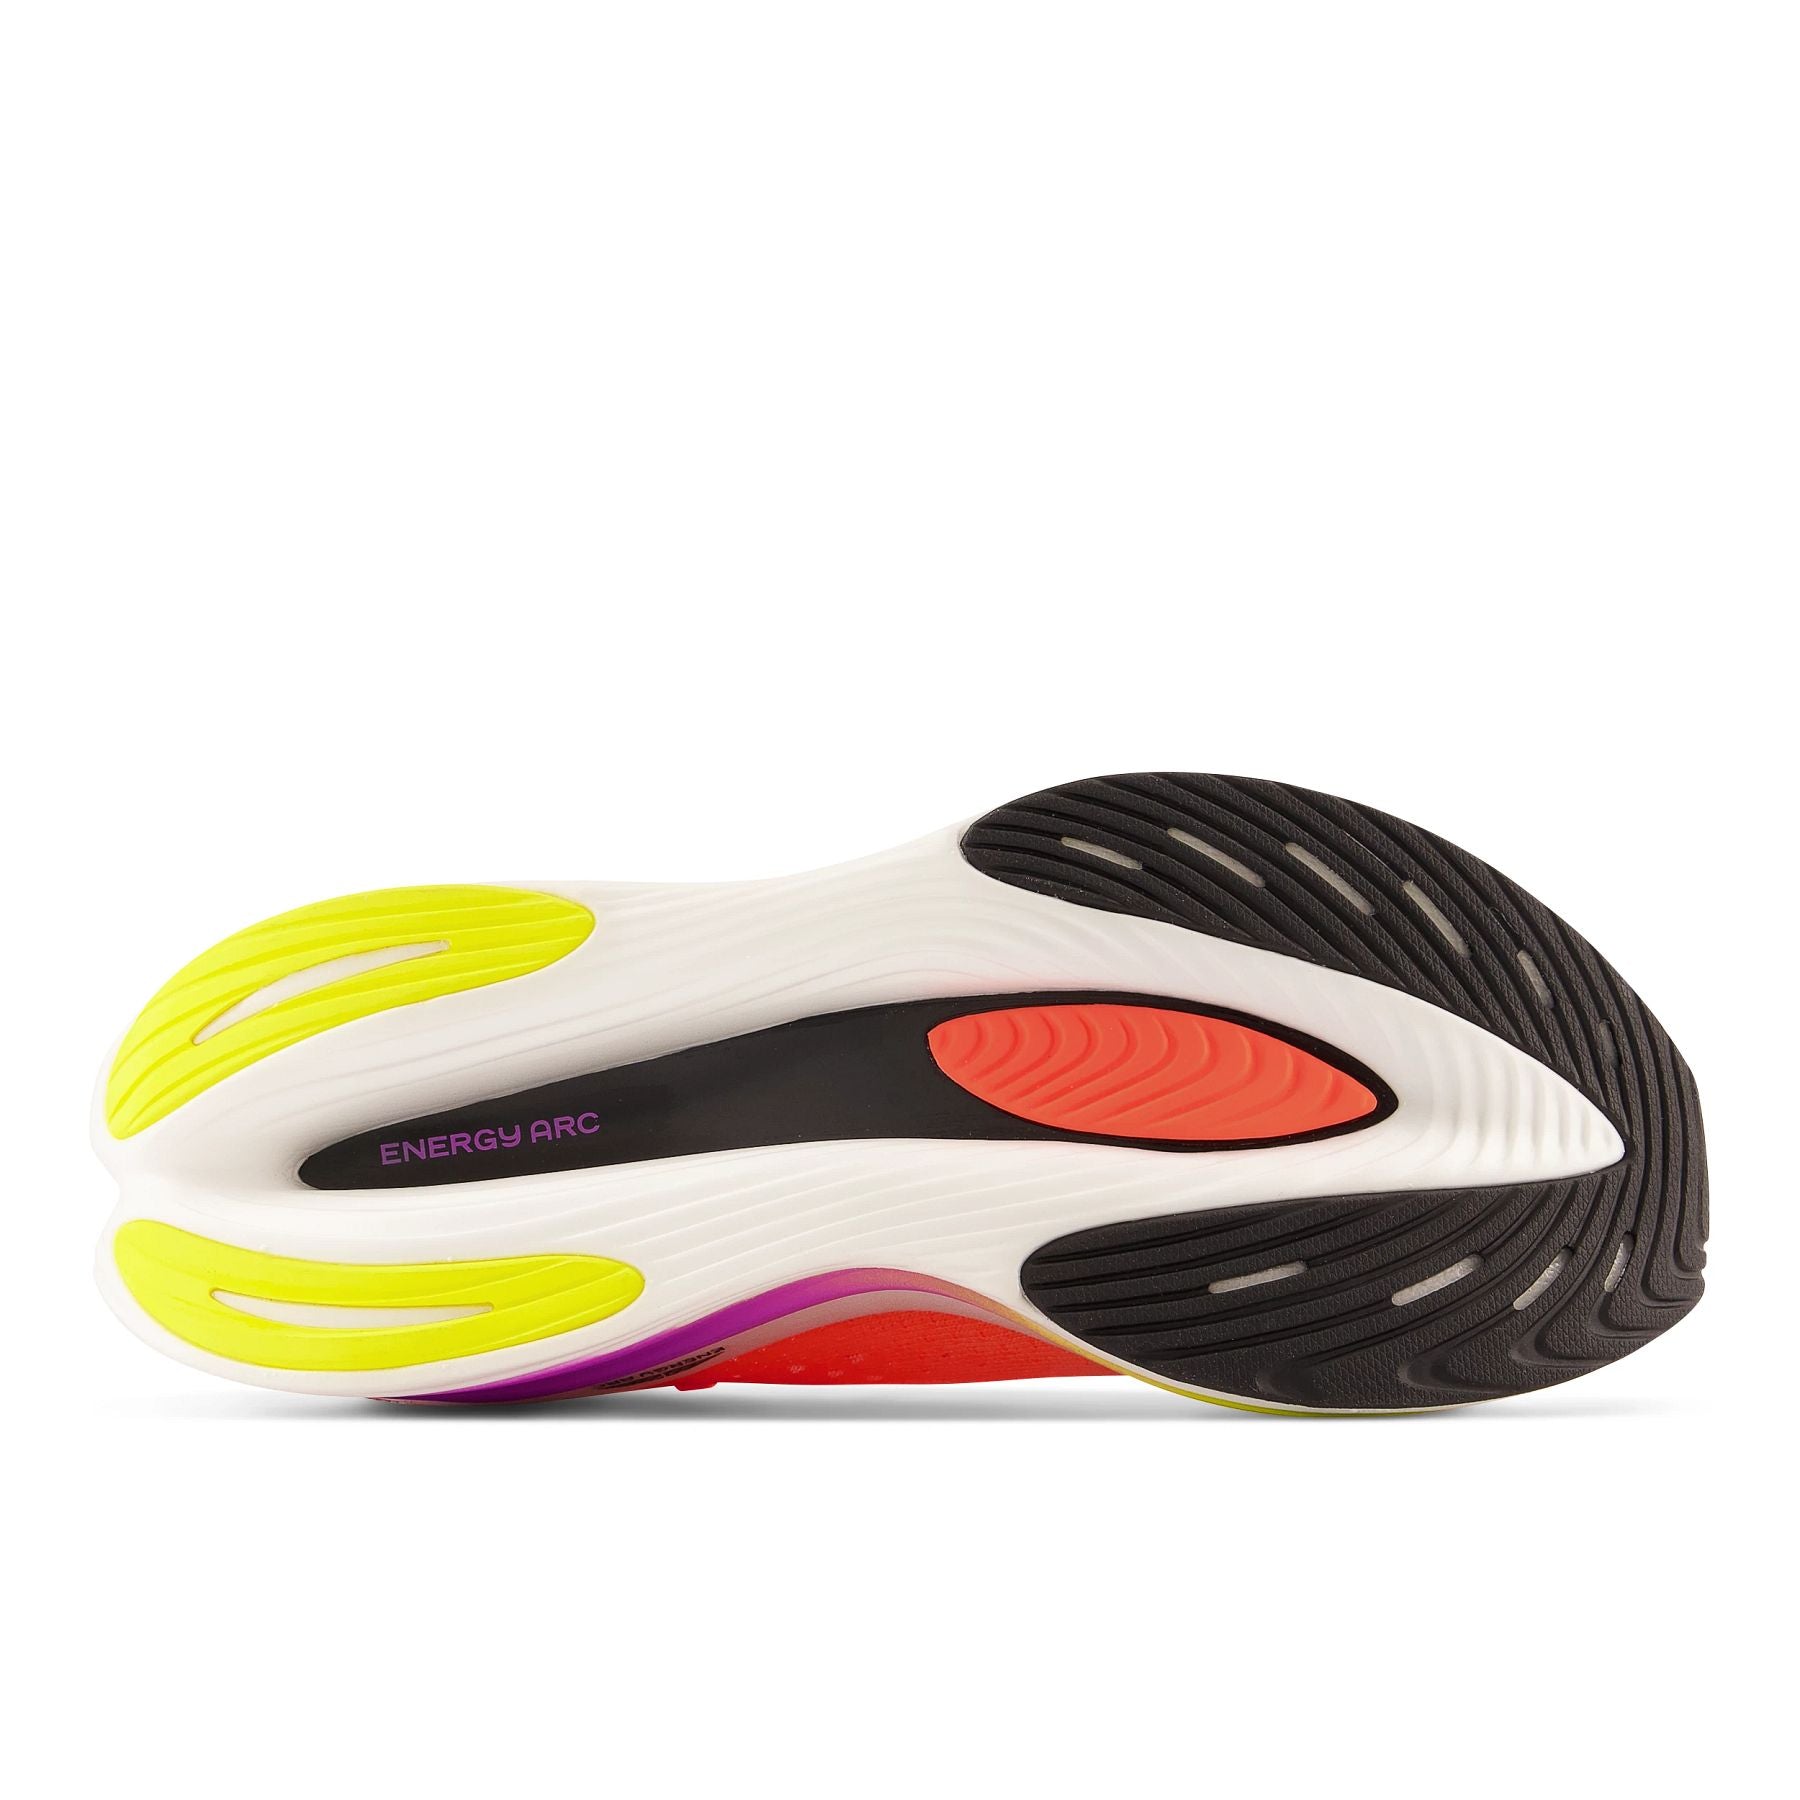 Bottom (outer sole) view of the Men's Super Comp Elite 3 in Neon/Dragonfly